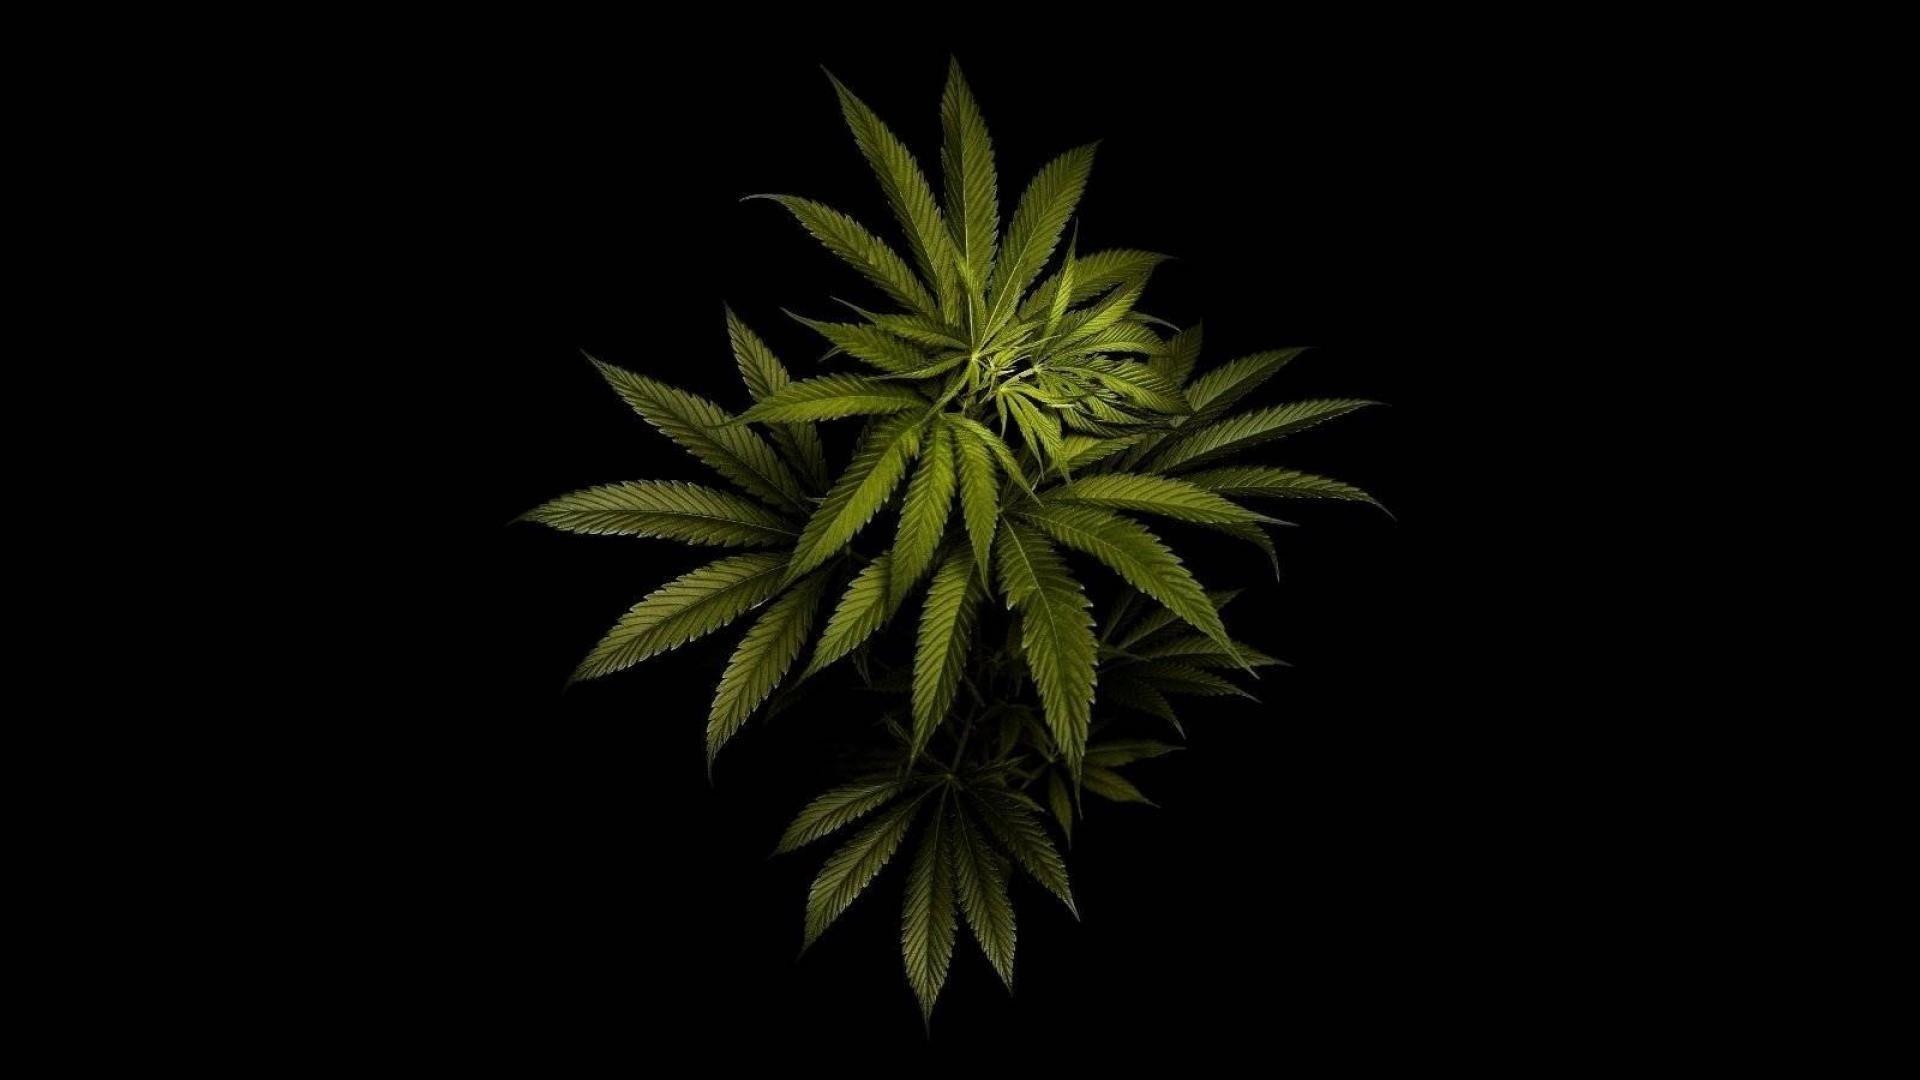 Hd Weed Plant Wallpaper 1080p